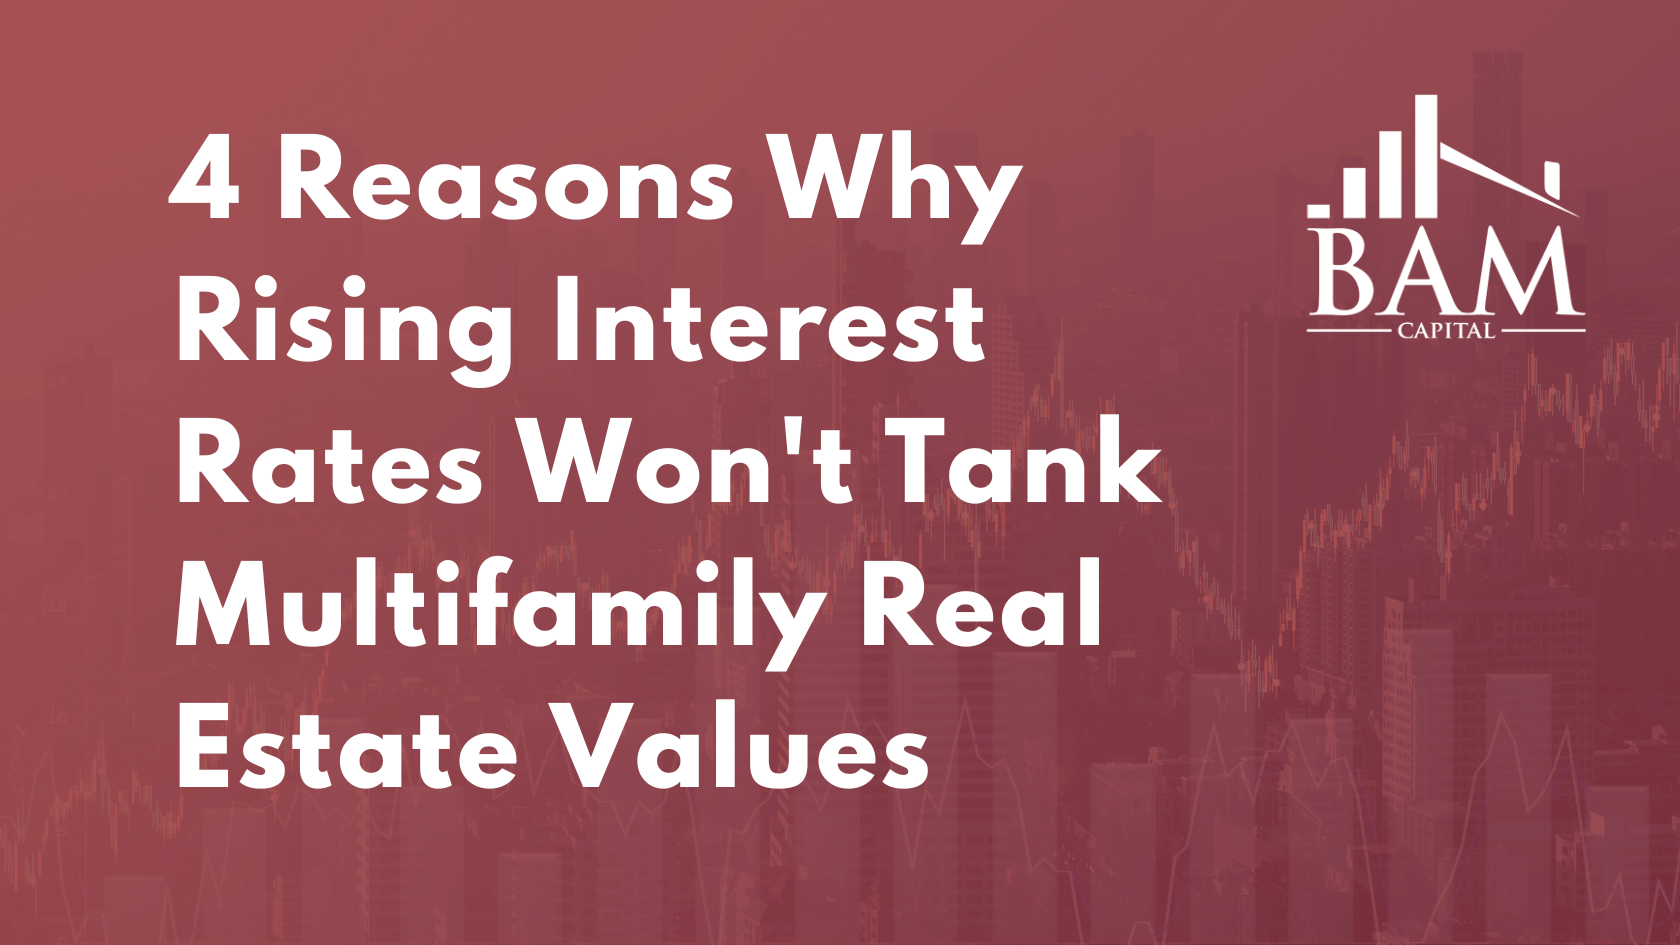 4 Reasons Why Rising Interest Rates Won't Tank Multifamily Real Estate Values